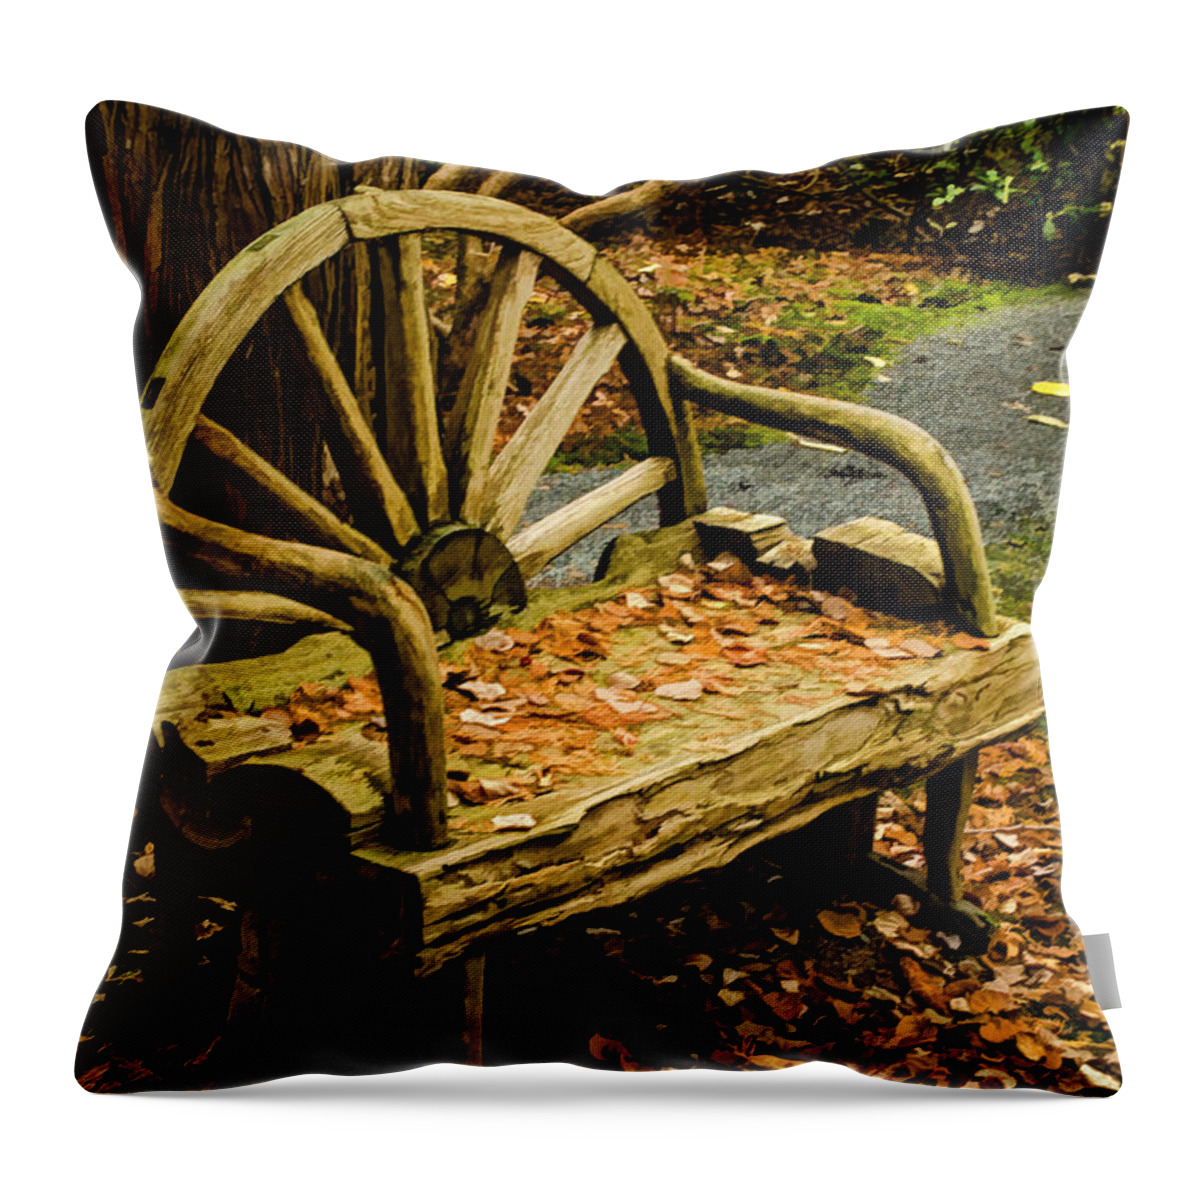 Bench Throw Pillow featuring the photograph Changing Of The Seasons by Jordan Blackstone